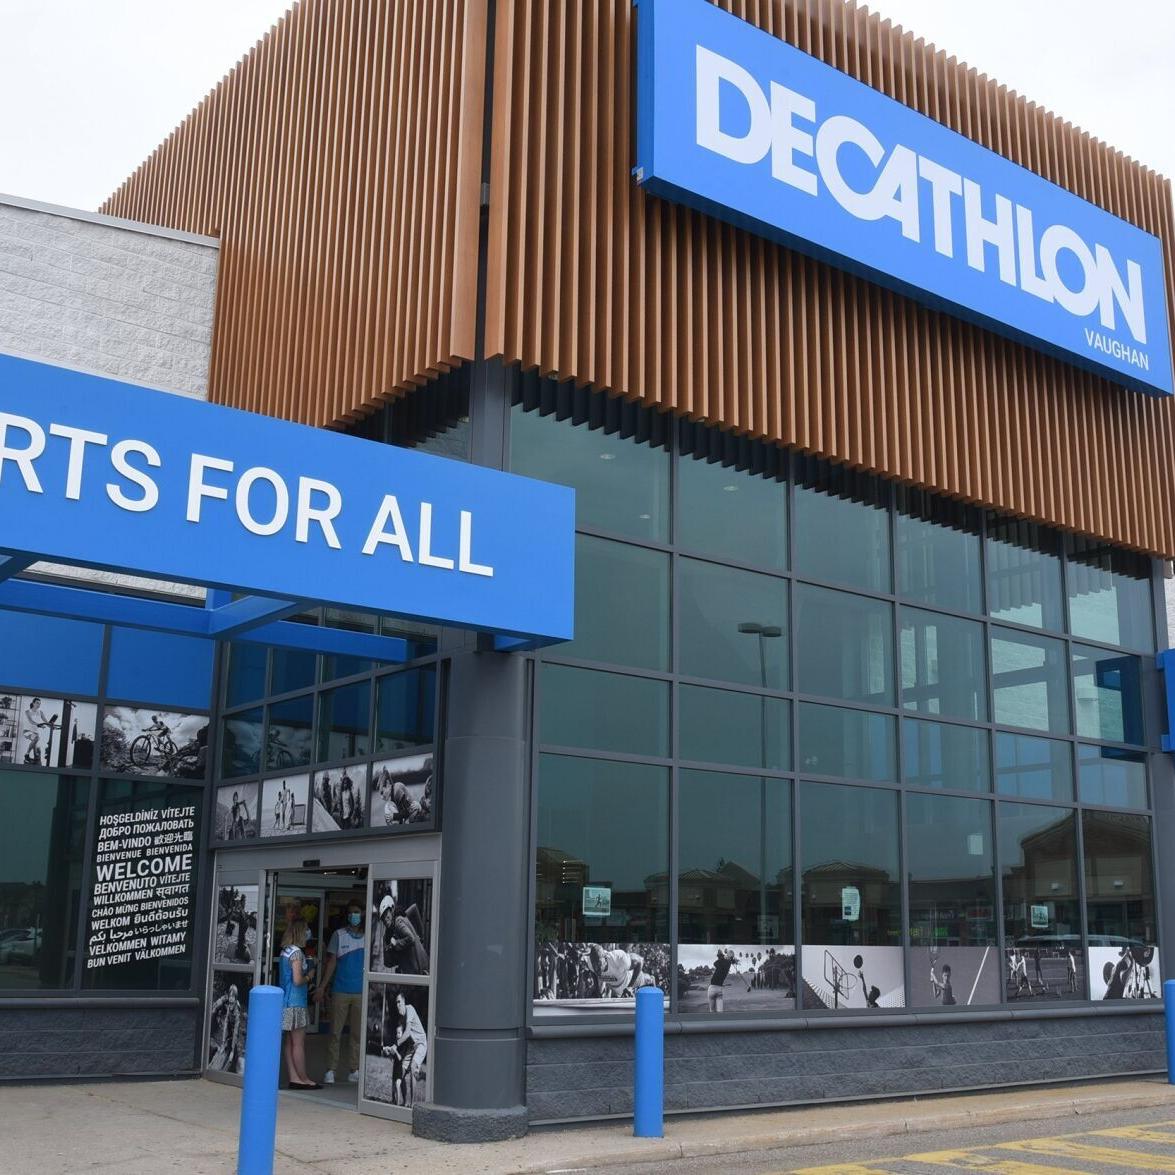 Sporting goods giant Decathlon taking another stab at US market